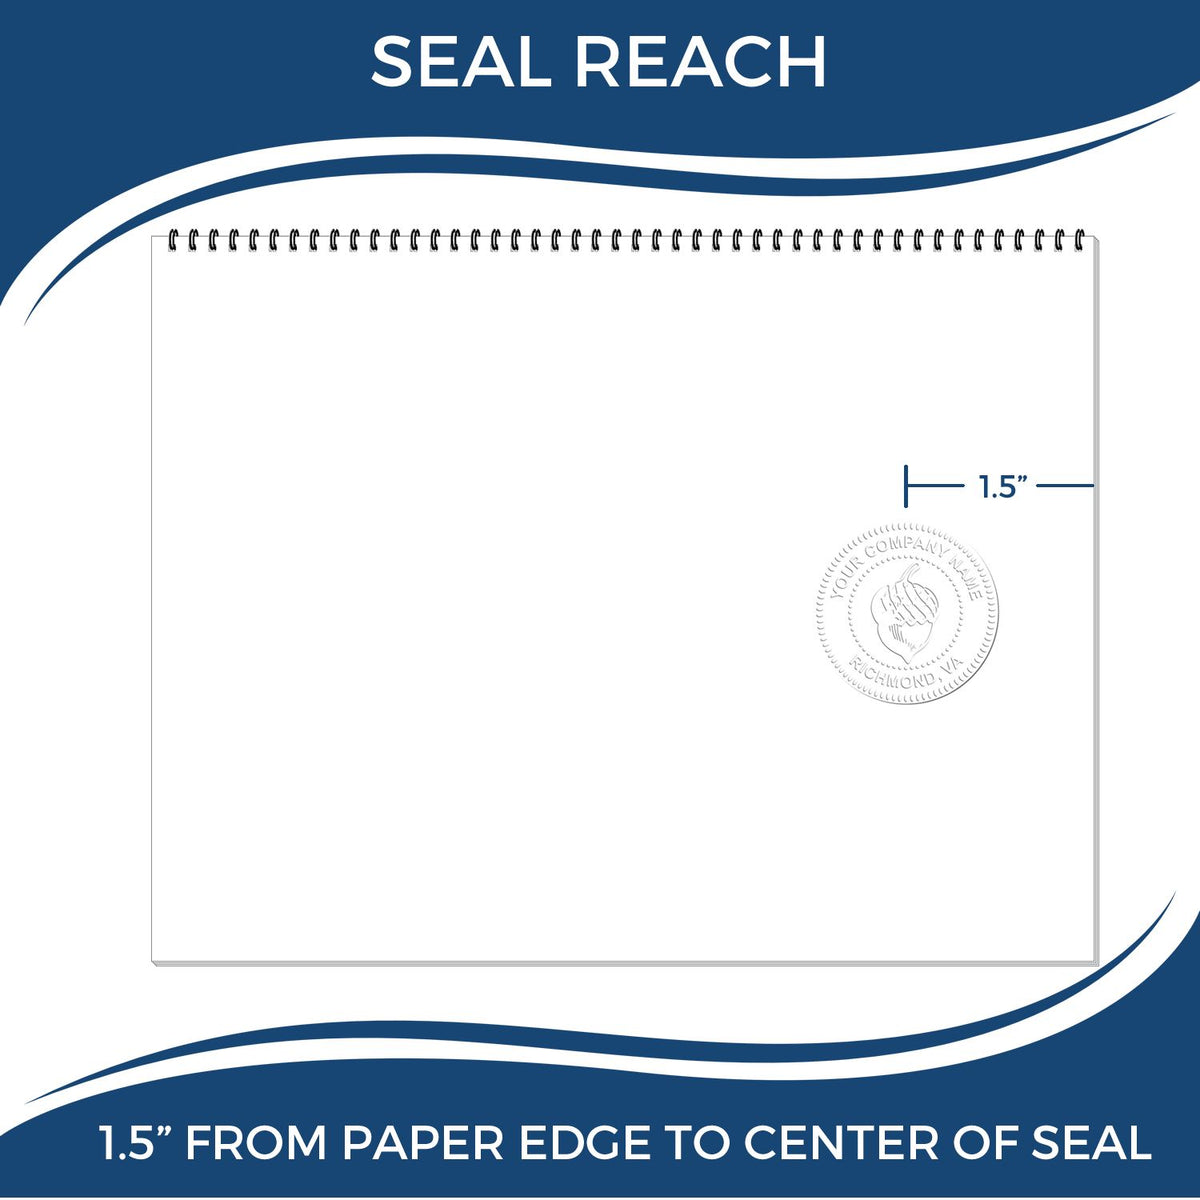 An infographic showing the seal reach which is represented by a ruler and a miniature seal image of the Hybrid North Dakota Engineer Seal